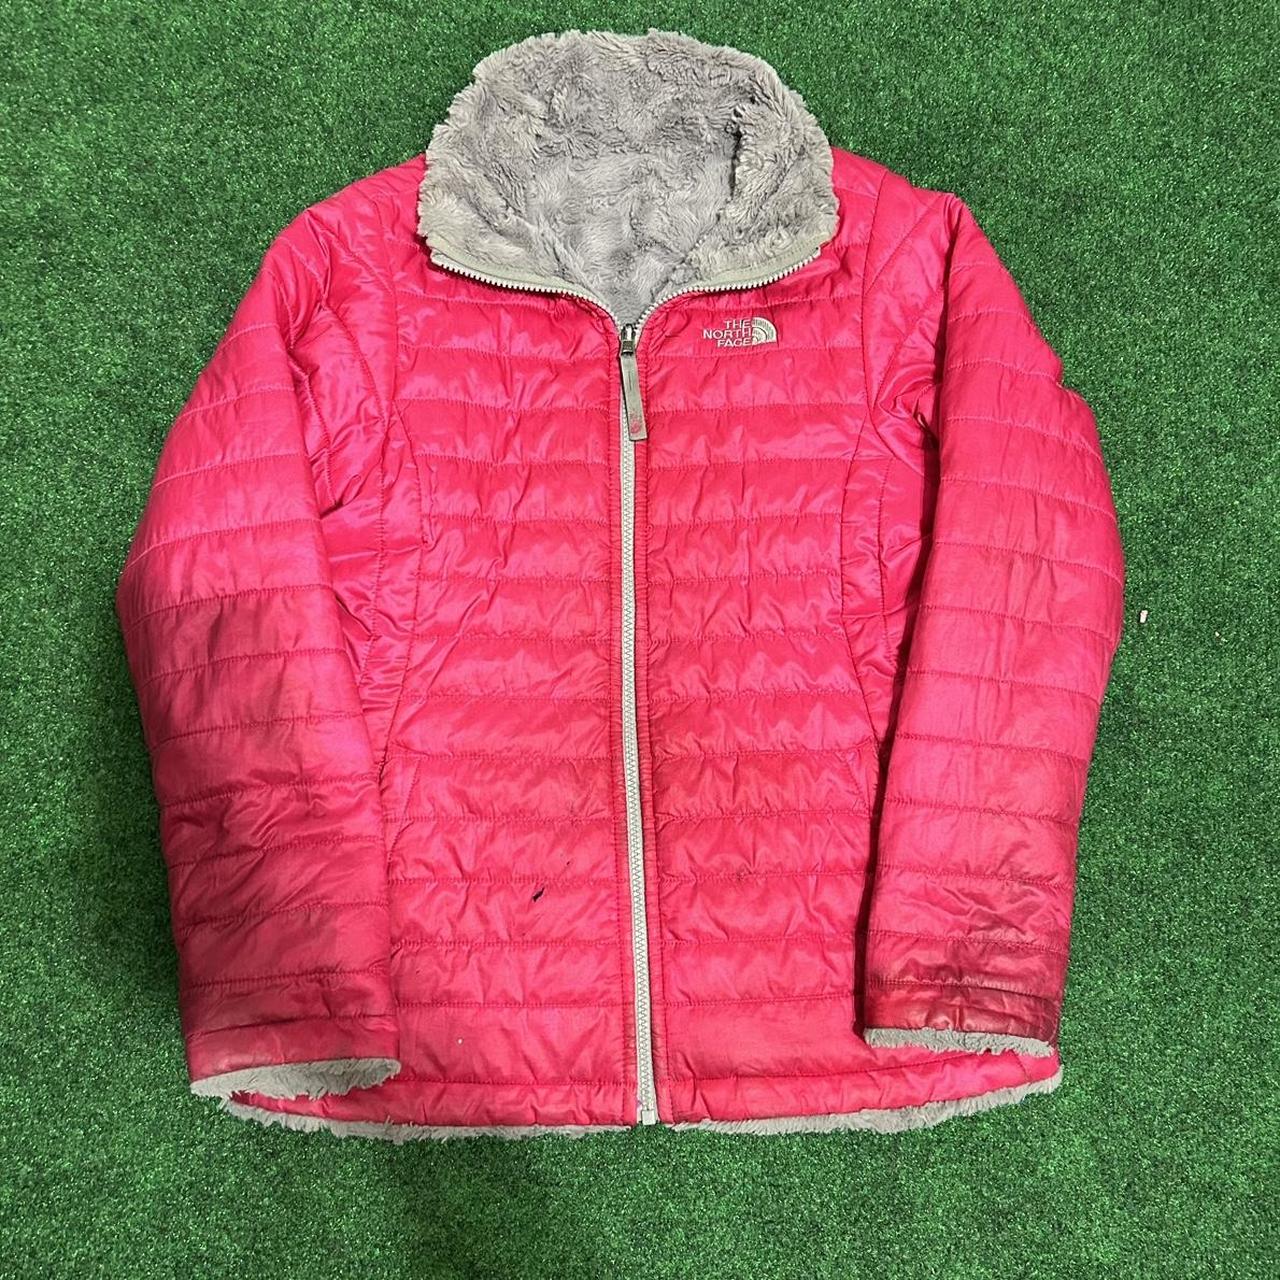 The North Face Women's Pink and Grey Jacket | Depop